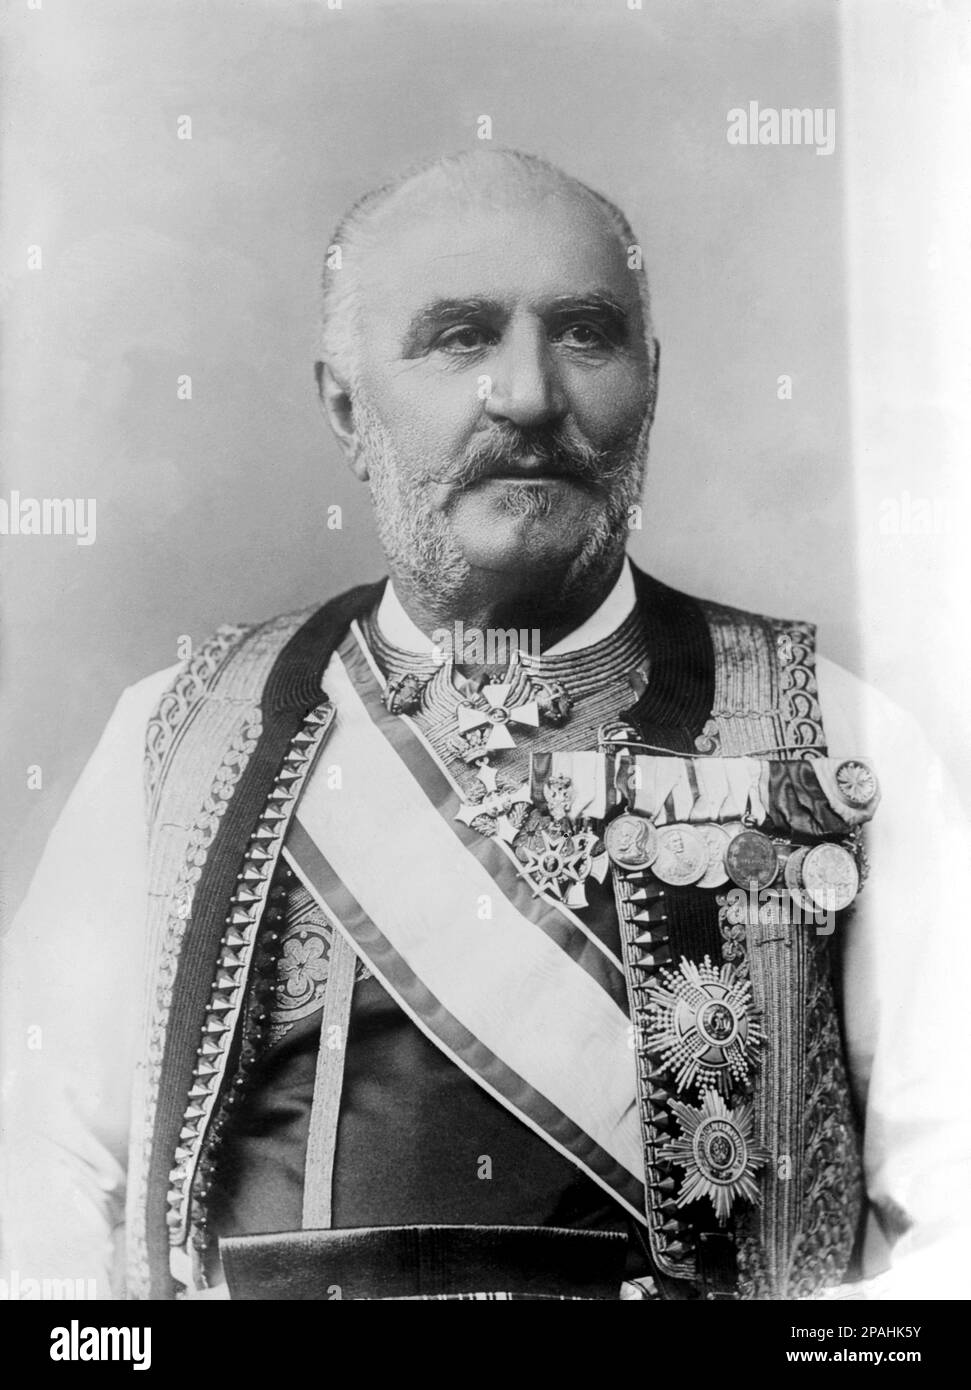 1911 ca. , Montenegro : The King NICHOLAS I of MONTENEGRO ( 1841 - 1921 ) , married with Queen Milena  Vukotic of MONTENEGRO ( 1847 – 1923 ) . Parents of Queen of  Italy ELENA ( Helene of Montenegro , 1873 - 1952 ) . Nicholas was the only king of Montenegro, reigning as king from 1910 to 1918 and as prince from 1860 to 1910. He was also a poet , notably penning ' Onamo, 'namo ' , a popular anthem of Montenegro .- CASA SAVOIA - ITALIA - REALI - NOBILTA' ITALIANA - NOBILITY - ROYALTY - HISTORY - FOTO STORICHE  - BELLE EPOQUE -  RE NICOLA - beard - barba - medals - medaglie - medaglia - baffi - m Stock Photo